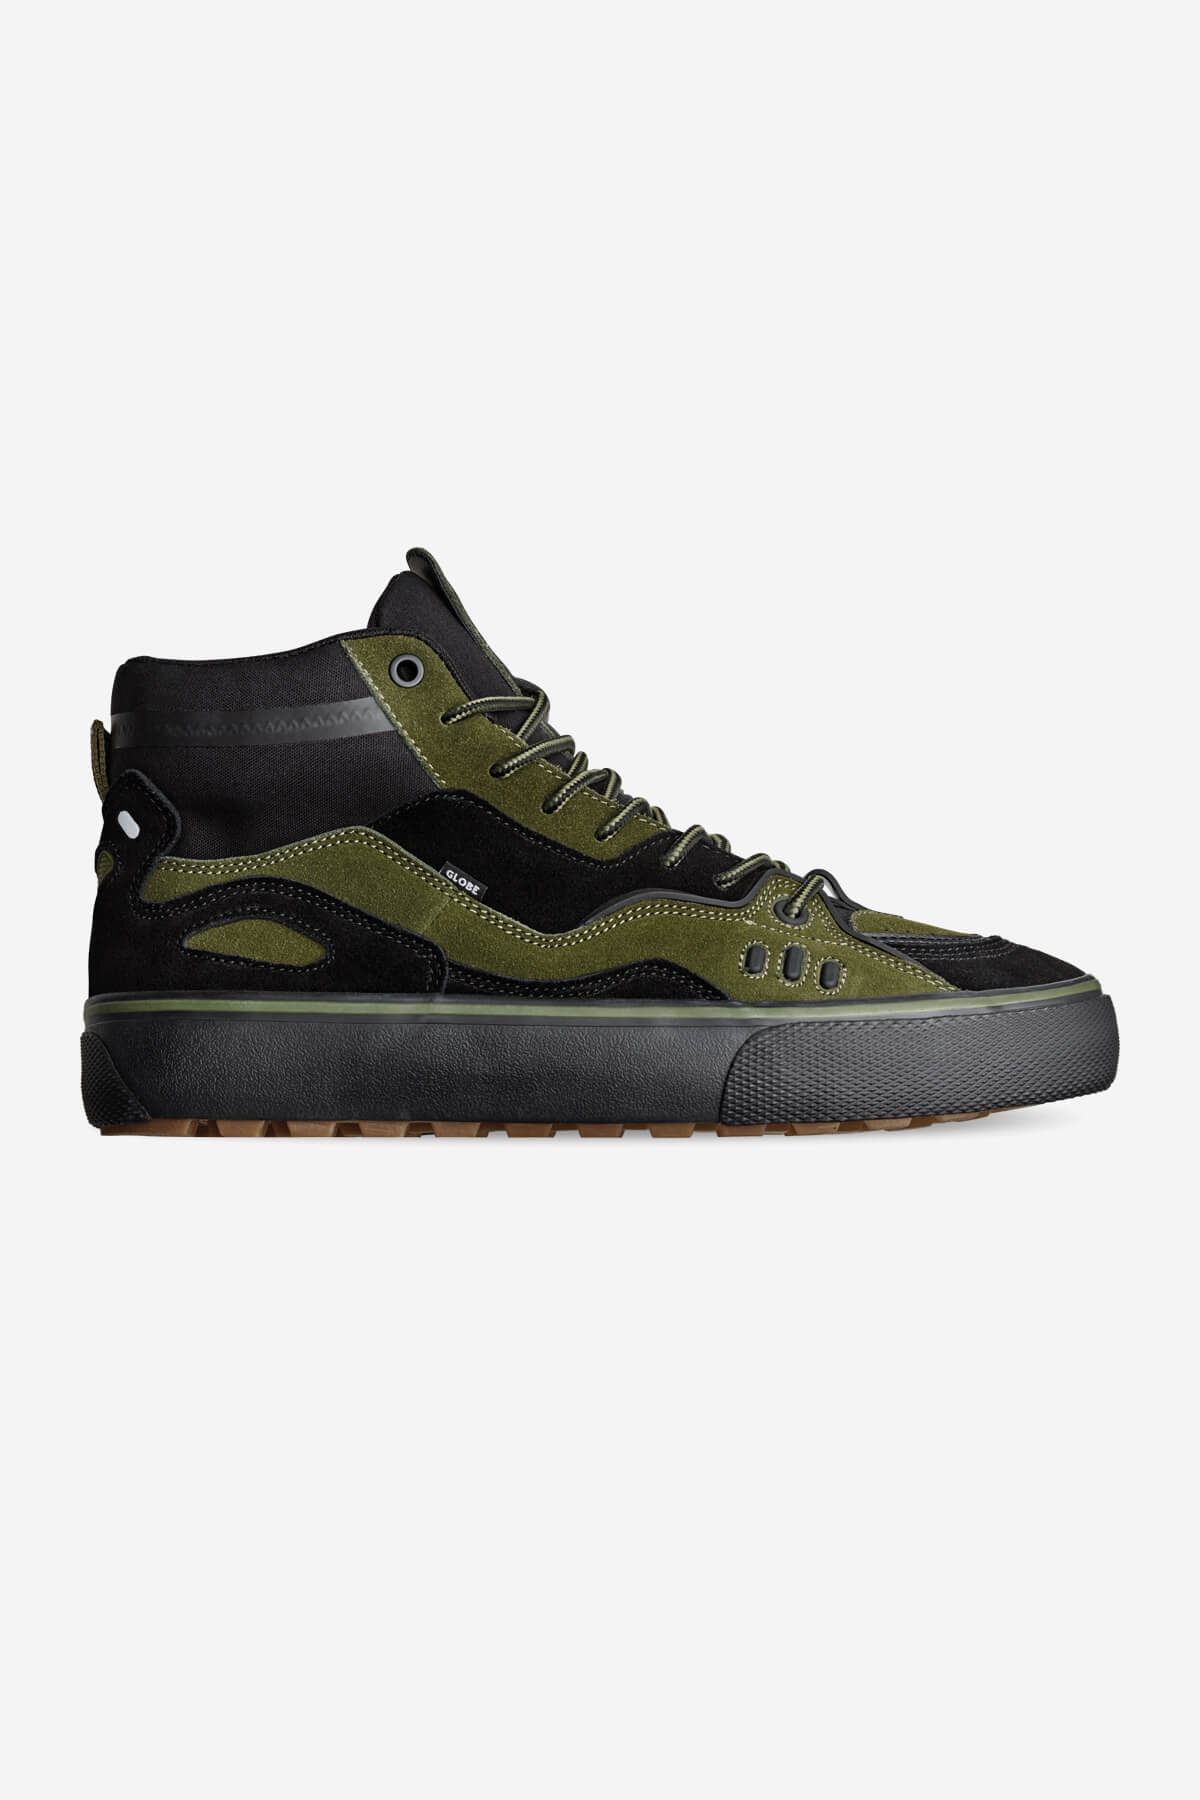 Globe Mid shoes Dimension skateboard  shoes in Black/Moss/Summit